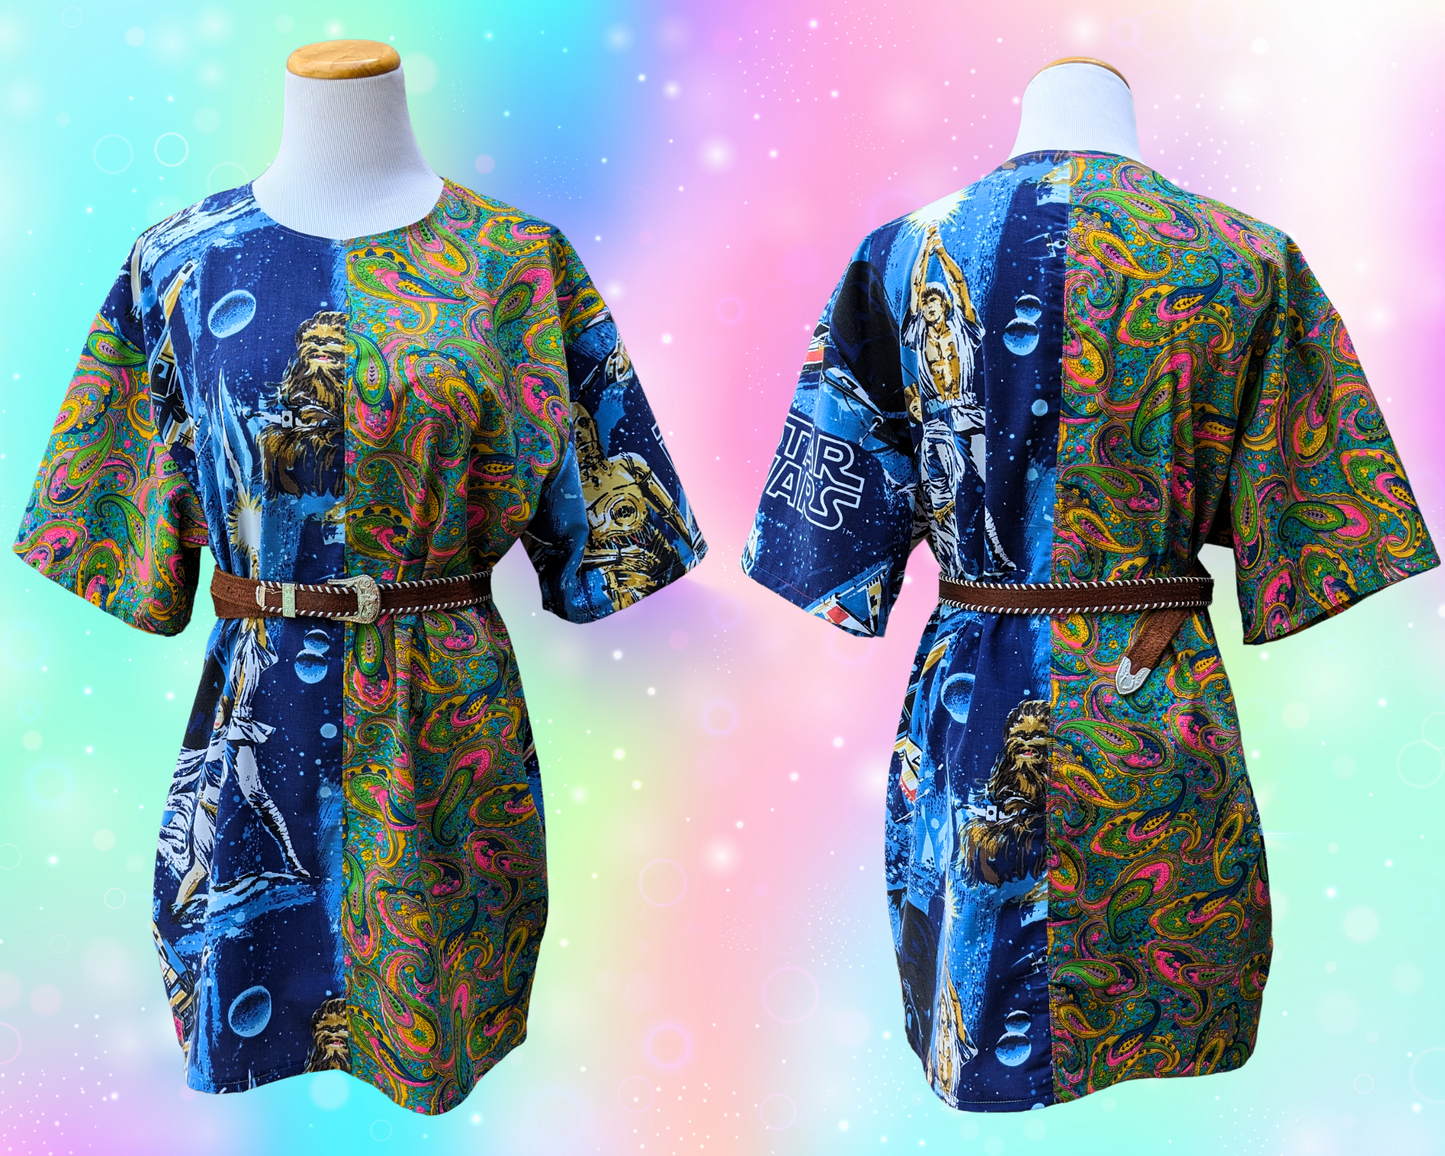 Handmade, Upcycled Star Ward Bedsheet + Groovy 1960's Fabric T-Shirt Dress Fits S-M